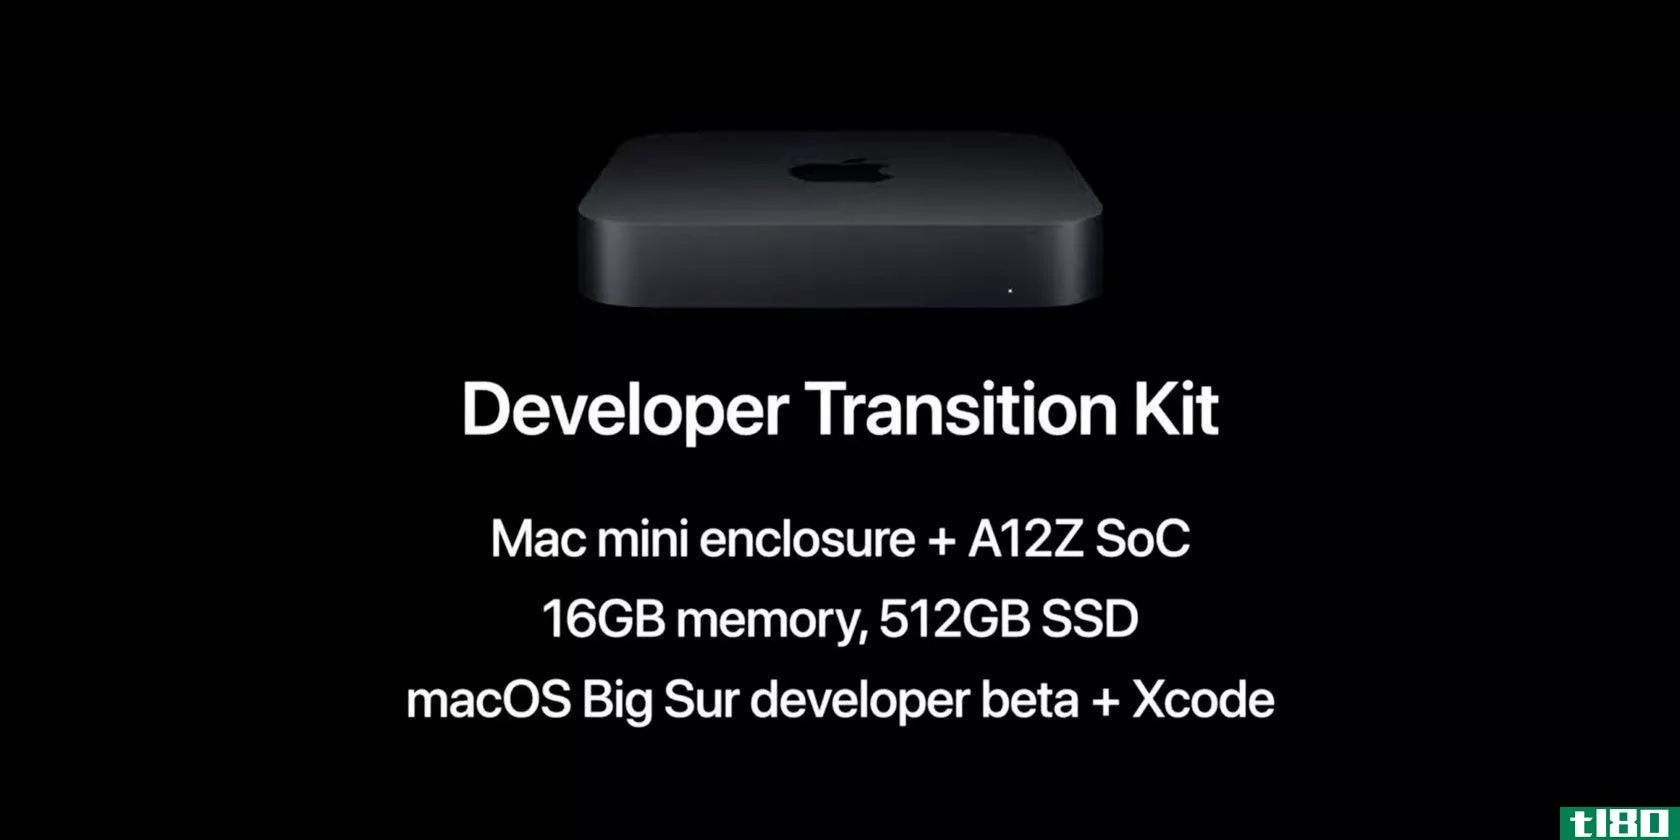 An image from the prerecorded WWDC video presentation showing Apple SVP of Software Engineering Craig Federighi announcing the Mac mini Developer Transition Kit